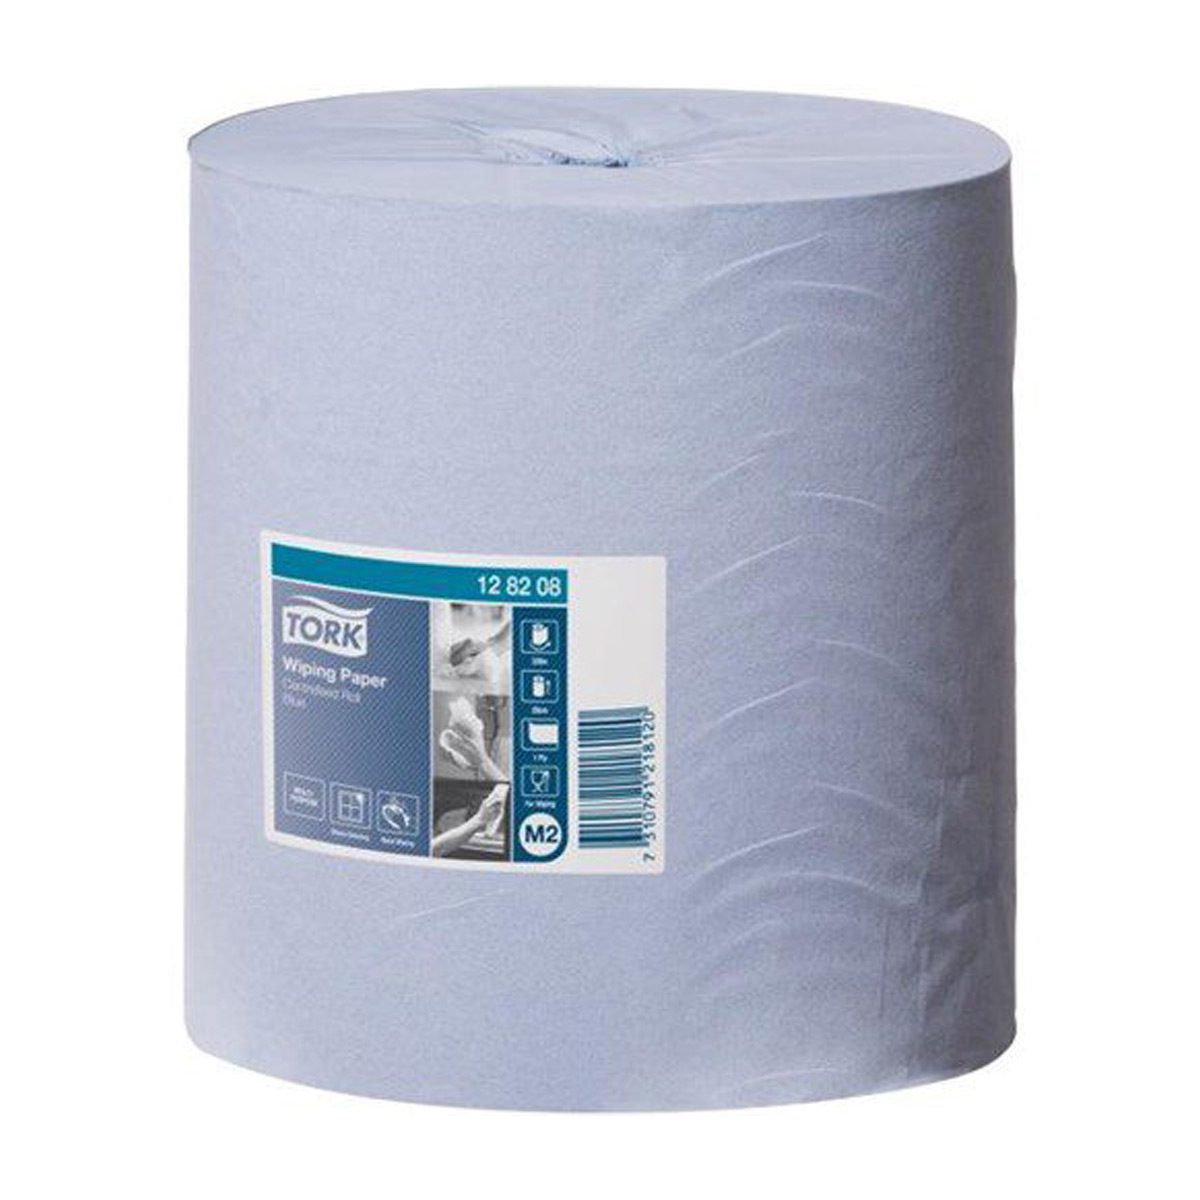 paper-products-paper-towels-tork-blue-centrefeed-towel-1-ply-wiping-paper-roll-320m-metres-6-rolls-m2-light-wiping-tasks-hand-wiping-where-hand-and-surface-wiping-required-vjs-distributors-128208